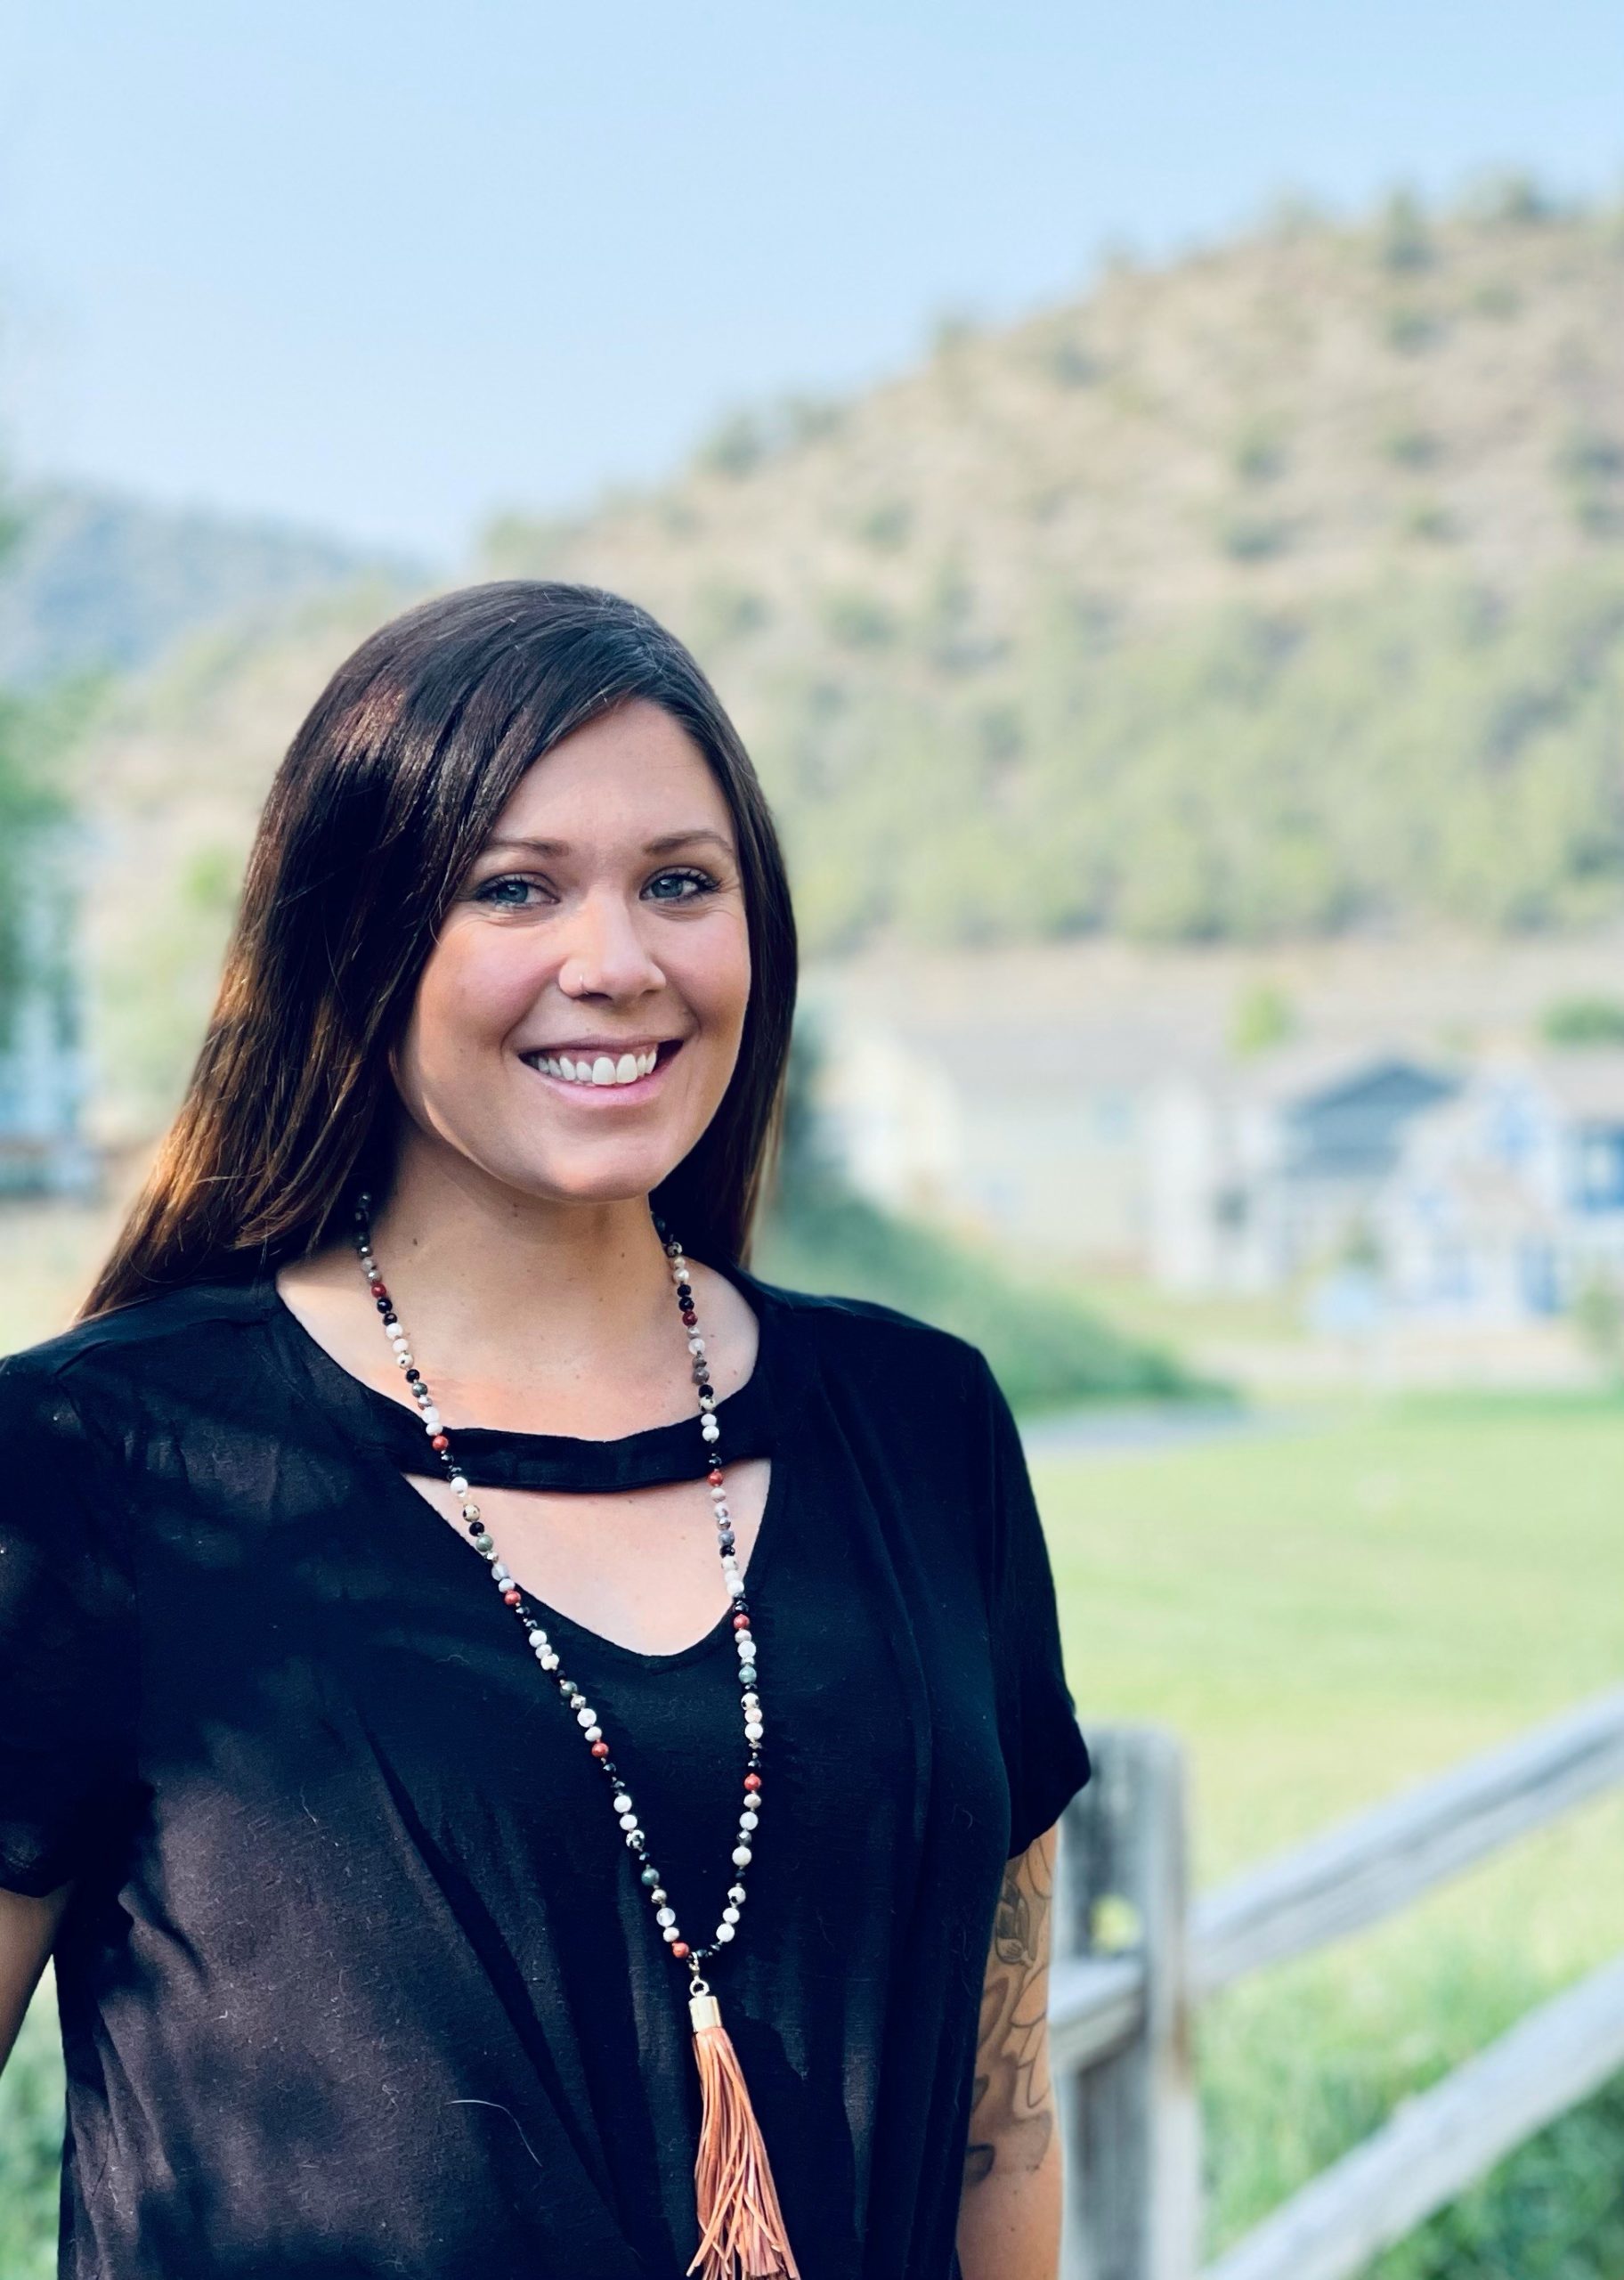 Kalli Pezel is the social media manager for both Iron Mountain Hot Springs and Glenwood Caverns Adventure Park